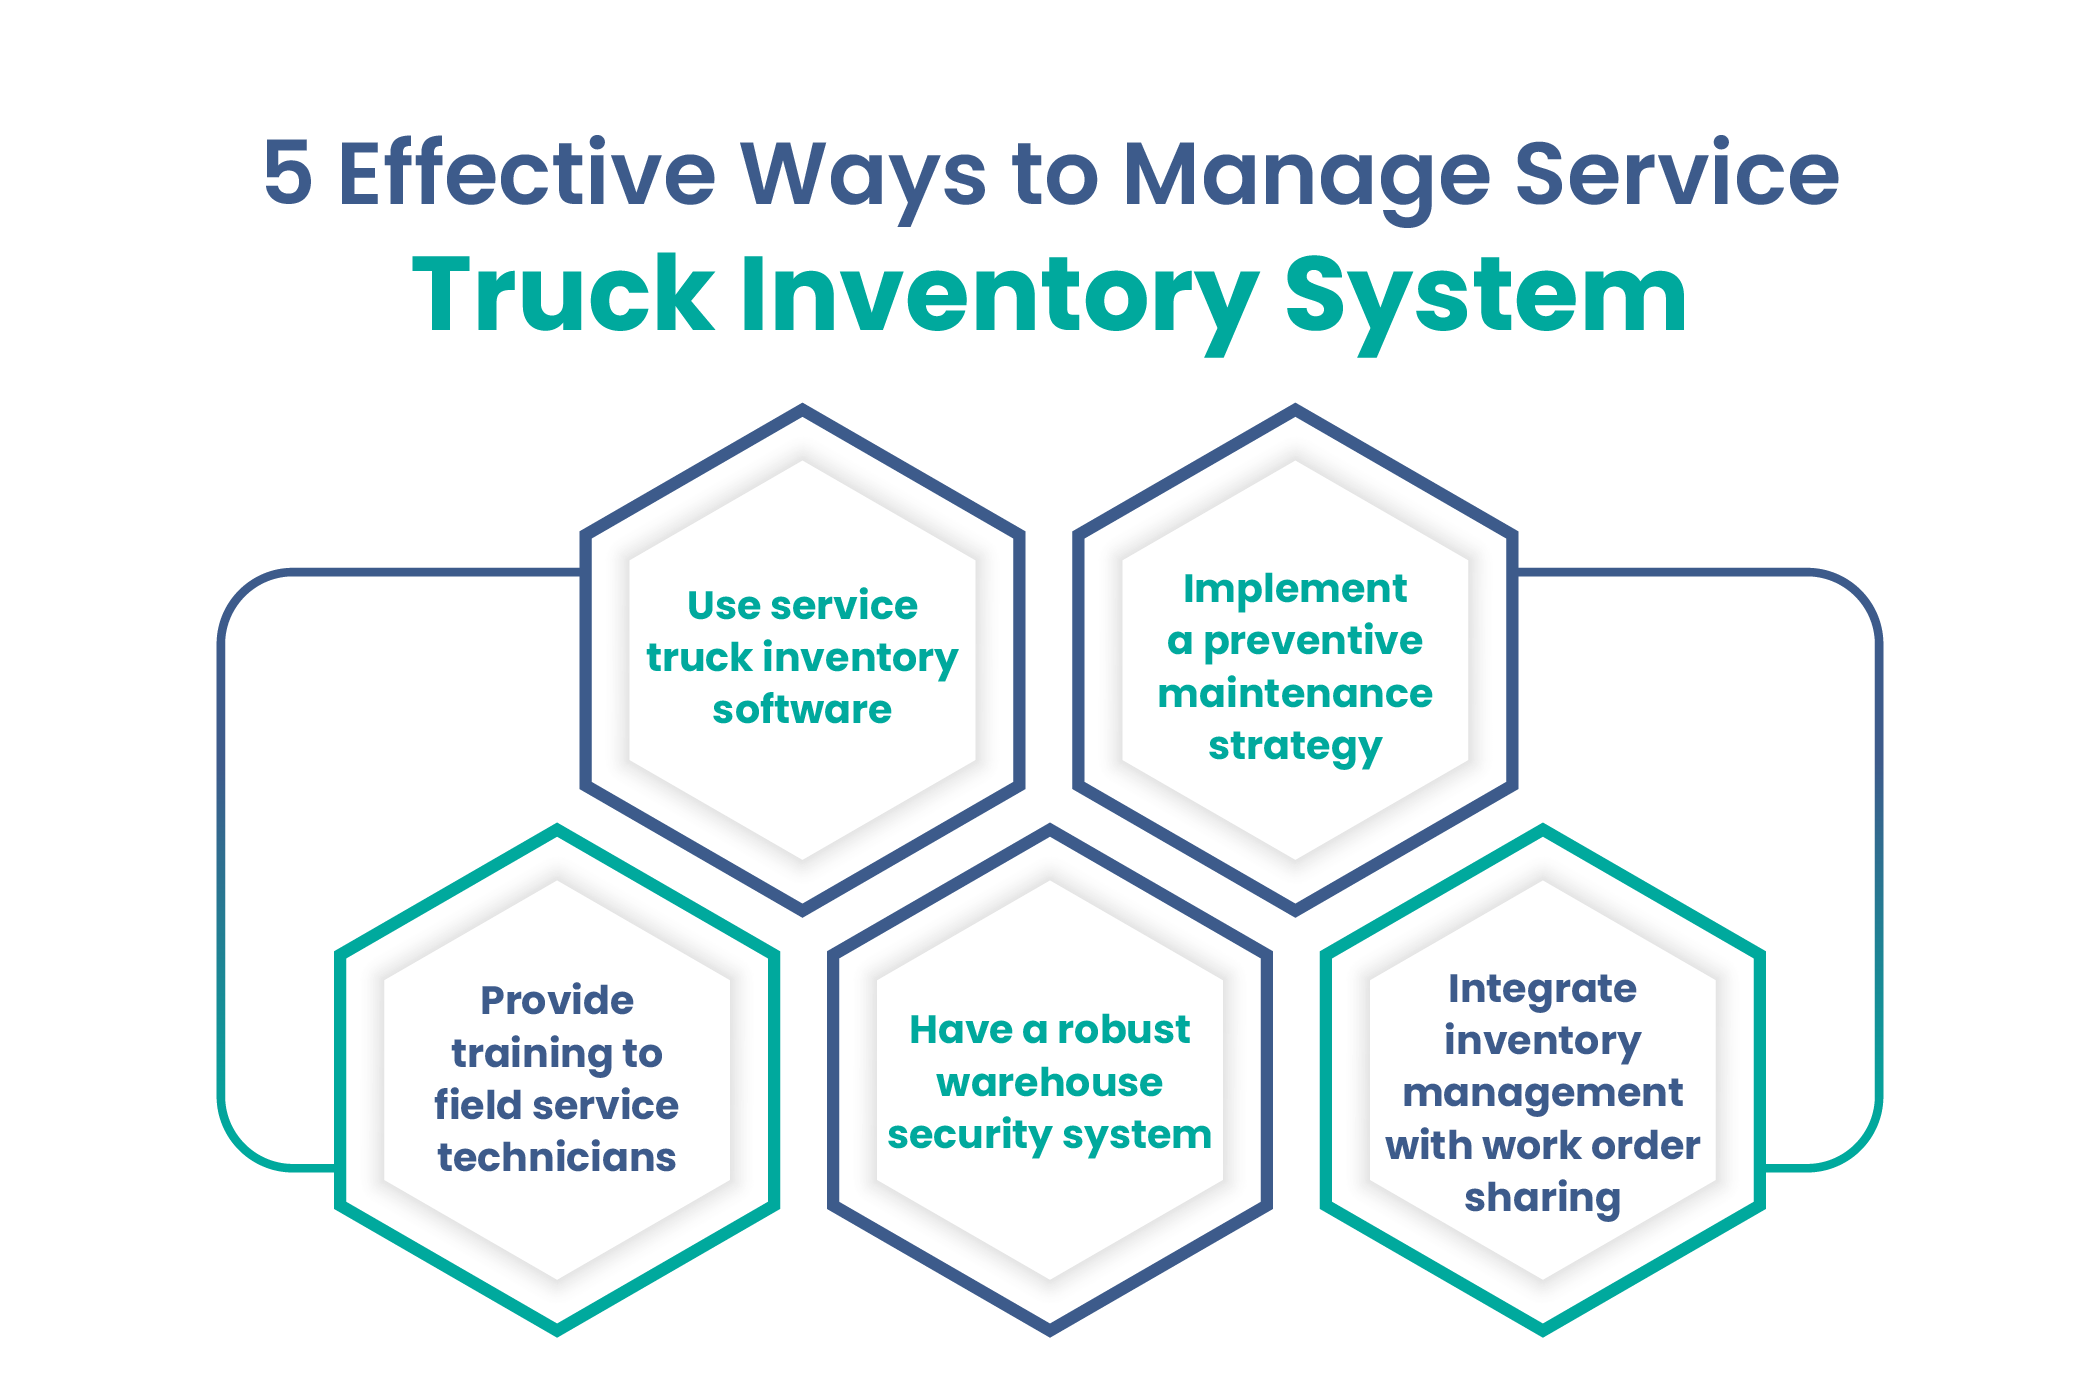 Manage Service Truck Inventory System